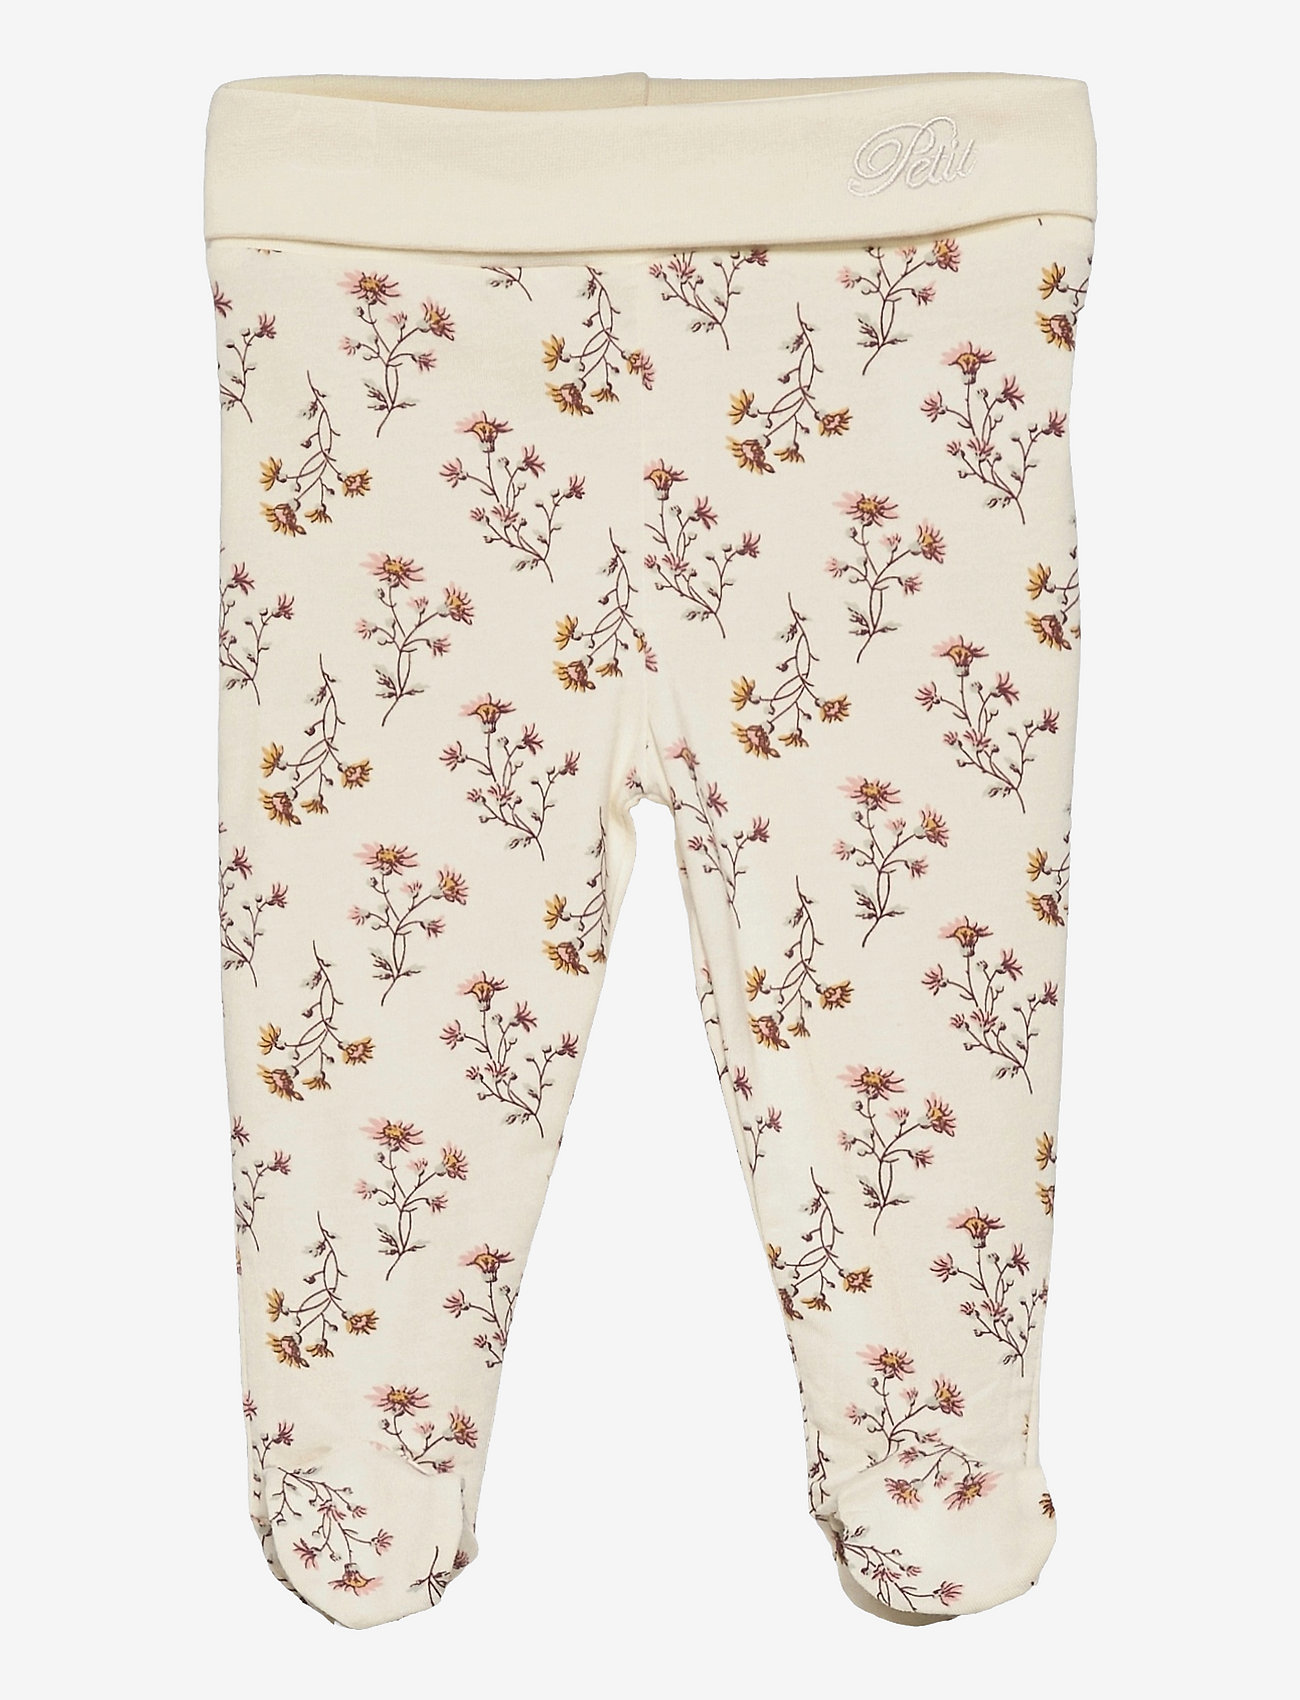 Sofie Schnoor Baby and Kids - Pants - laveste priser - off white - 0